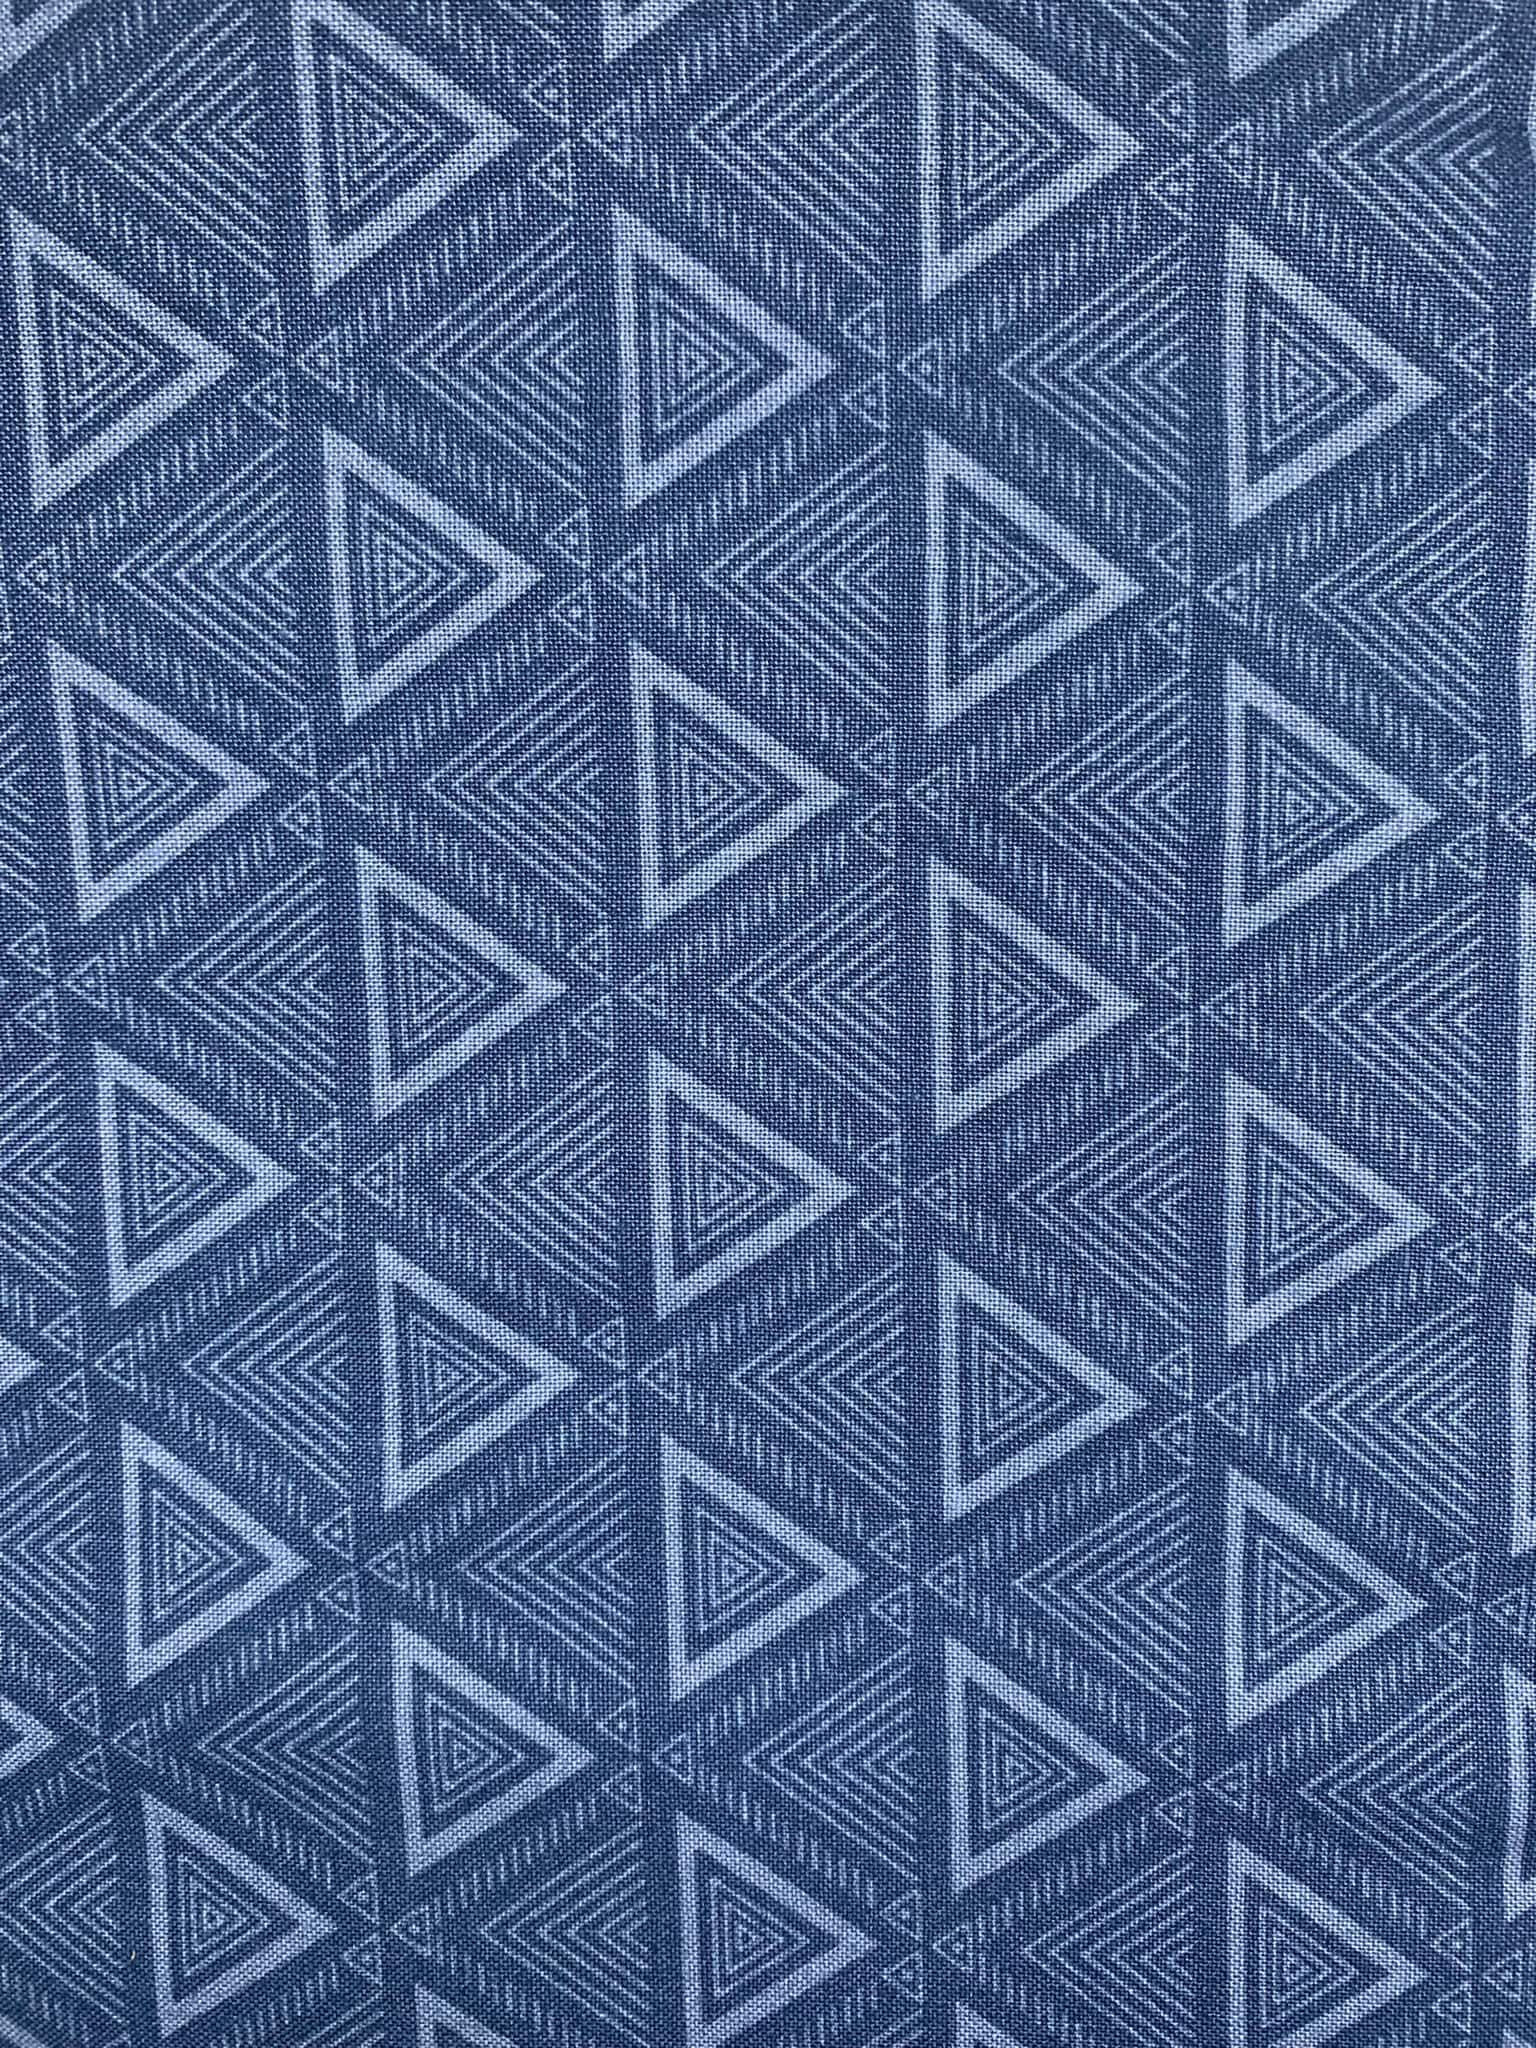 High Quality Quilting Fabric-- Hand Cut -Sold by the 1/2 Yard- Michael Miller Fabrics-100% Cotton Fabric. Color: Slate-Sold by the 1/2 Yard-